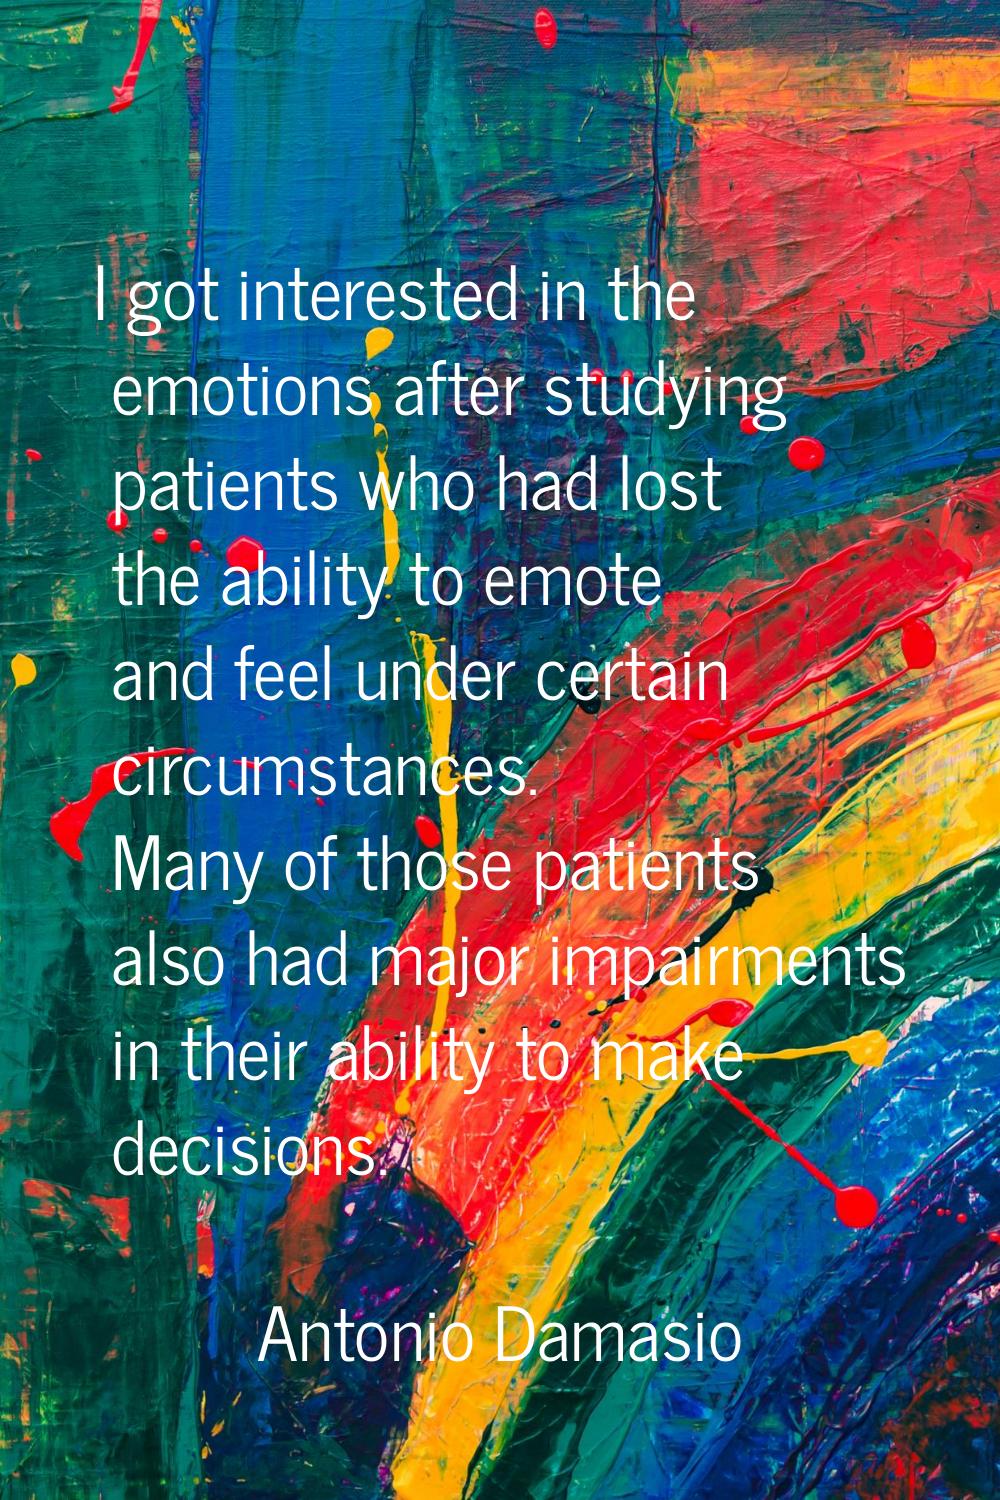 I got interested in the emotions after studying patients who had lost the ability to emote and feel